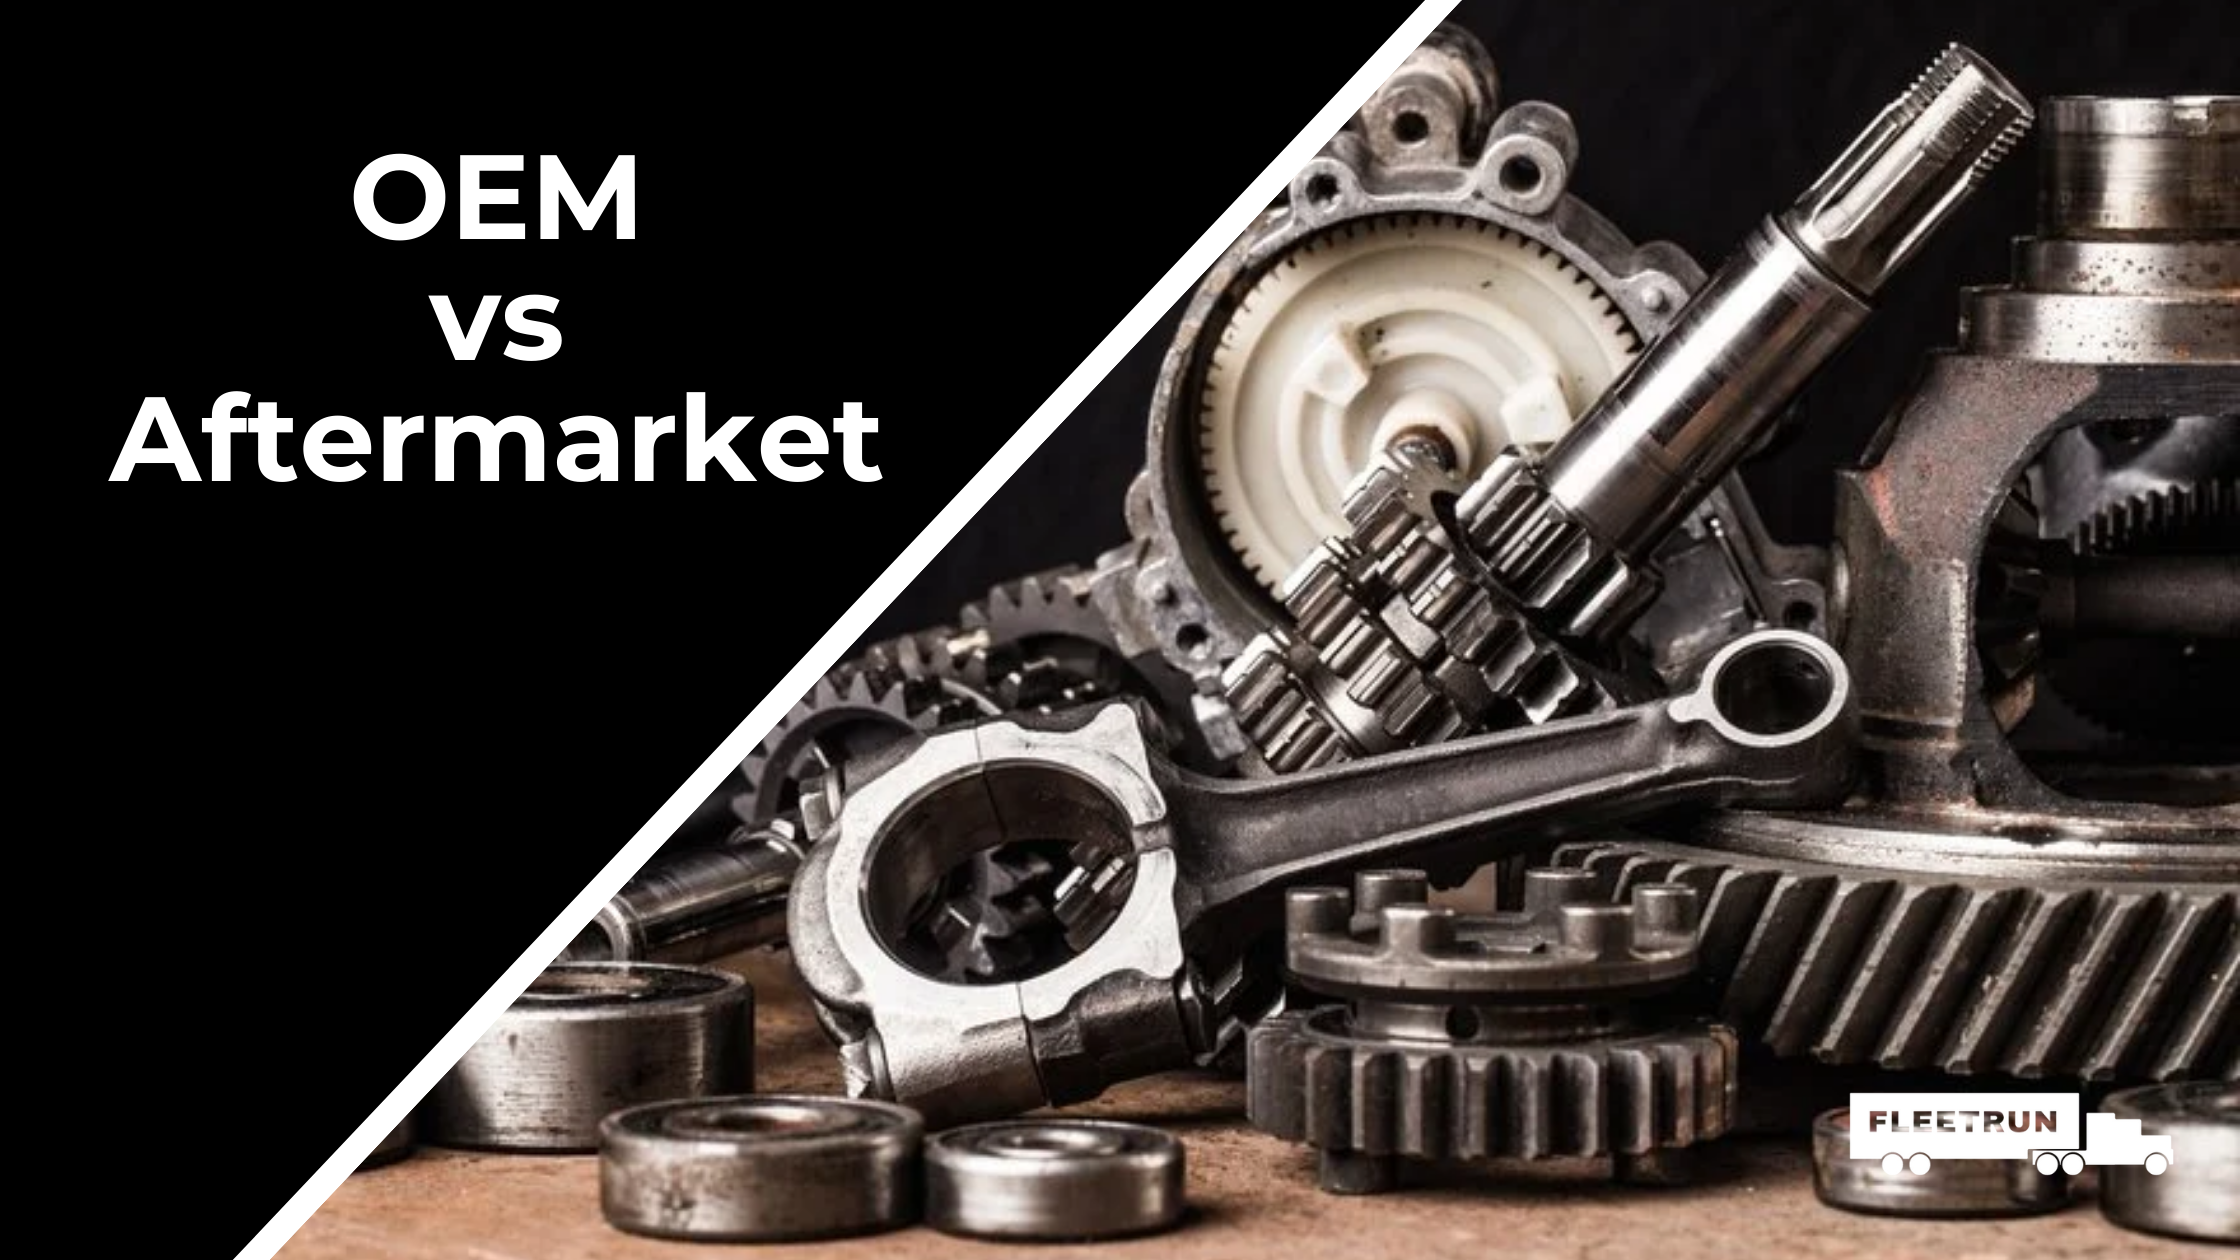 OEM vs Aftermarket: What is the best bang for your buck?